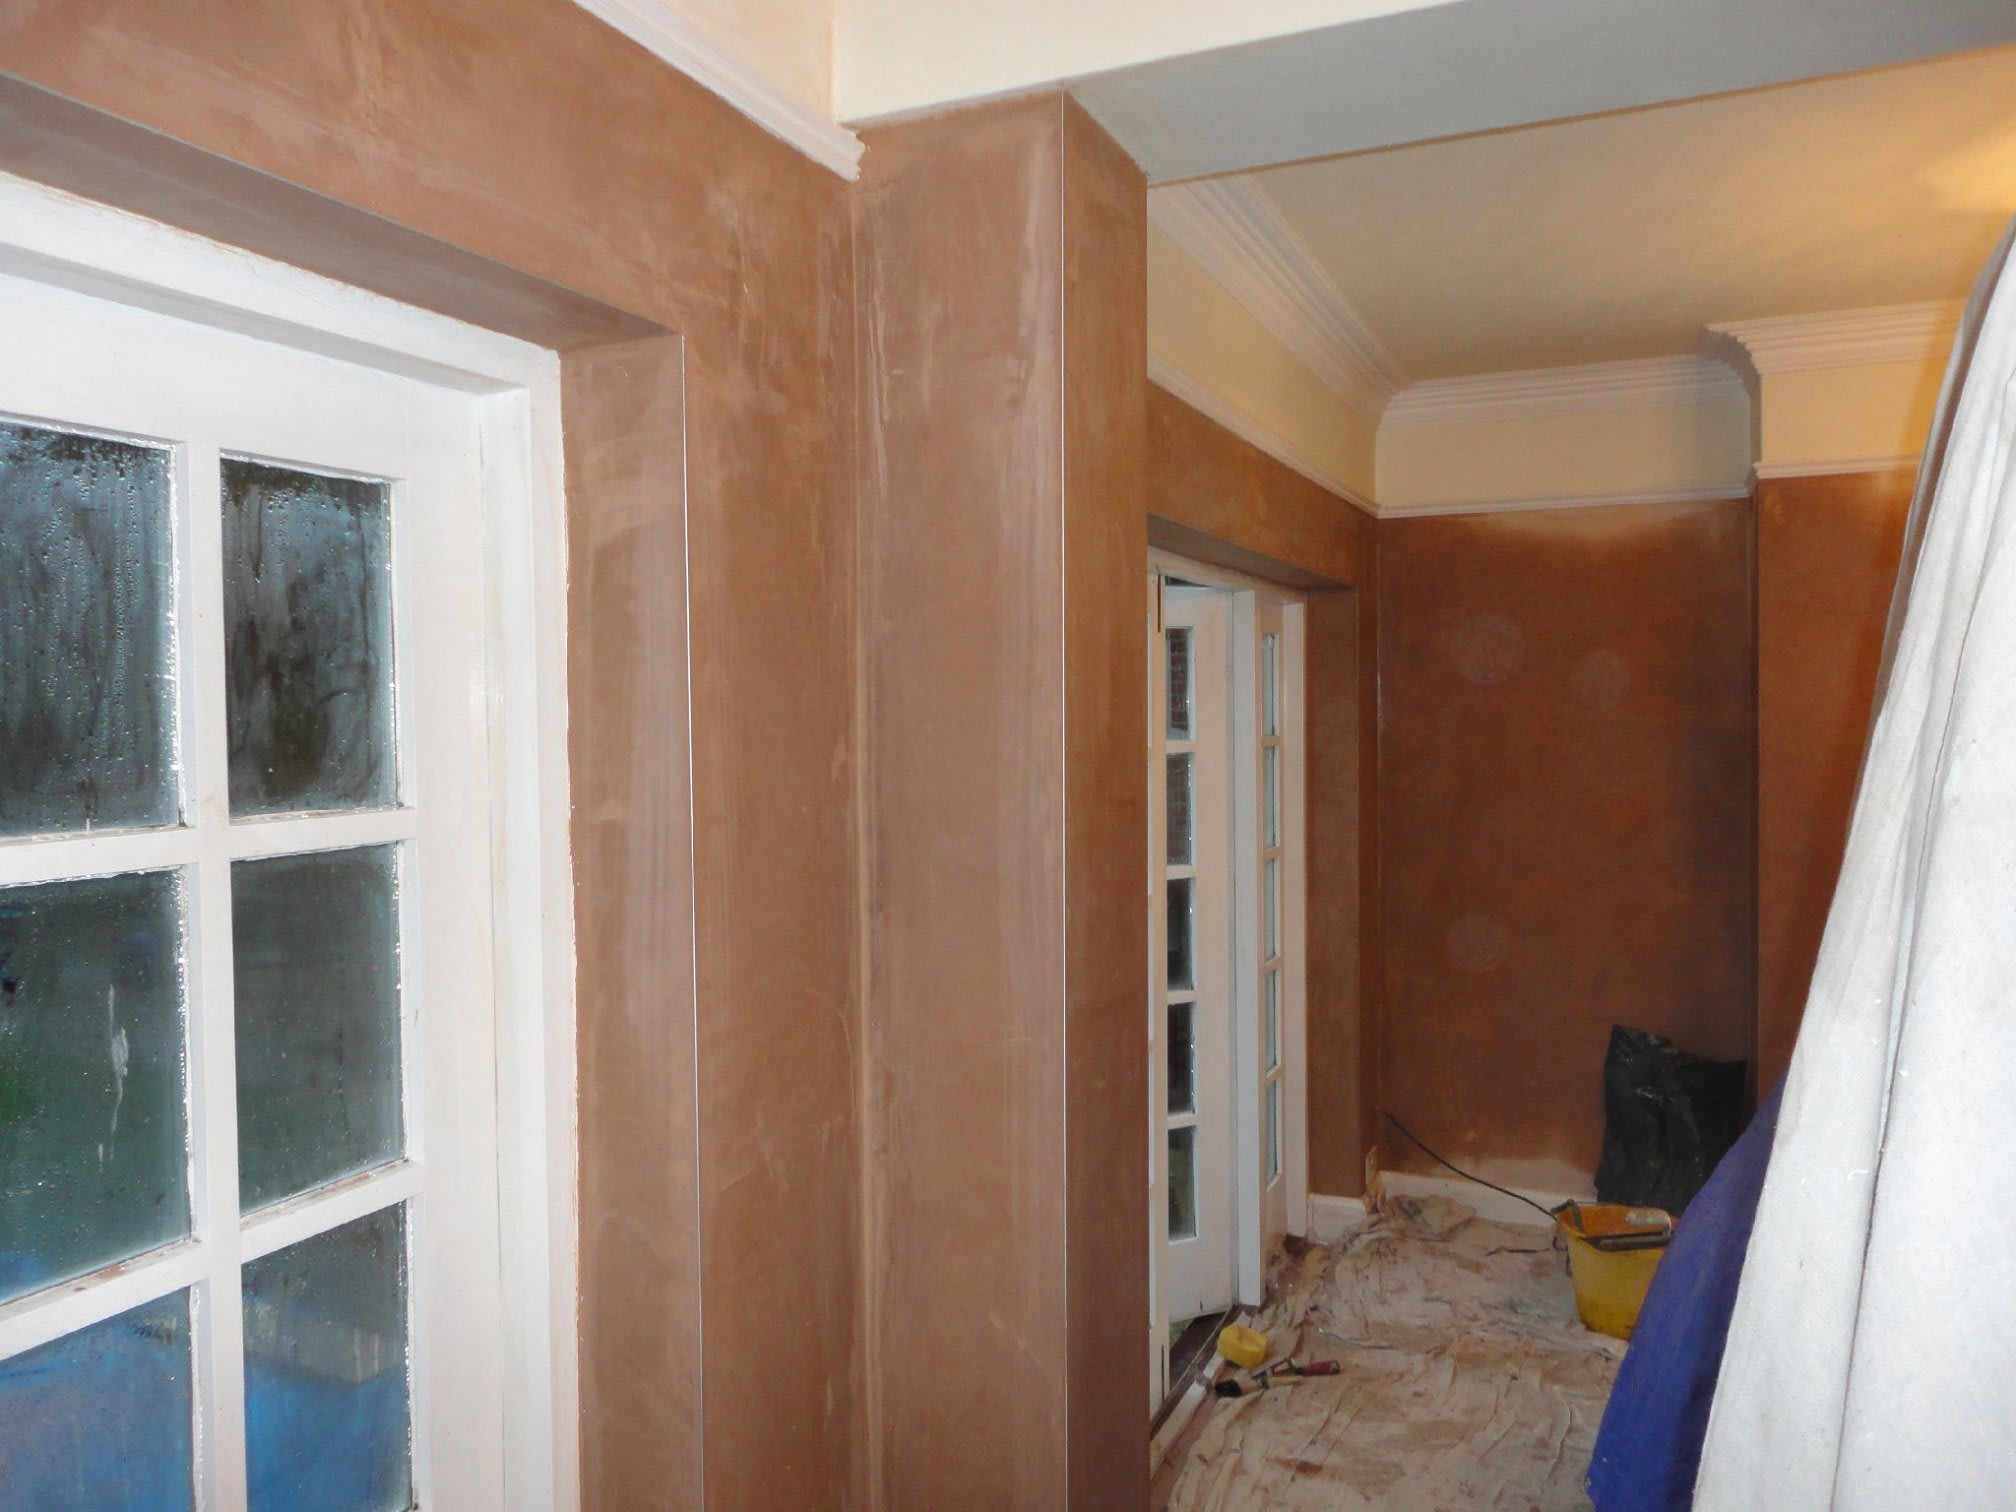 Essential Plastering Services Colchester 07527 325206